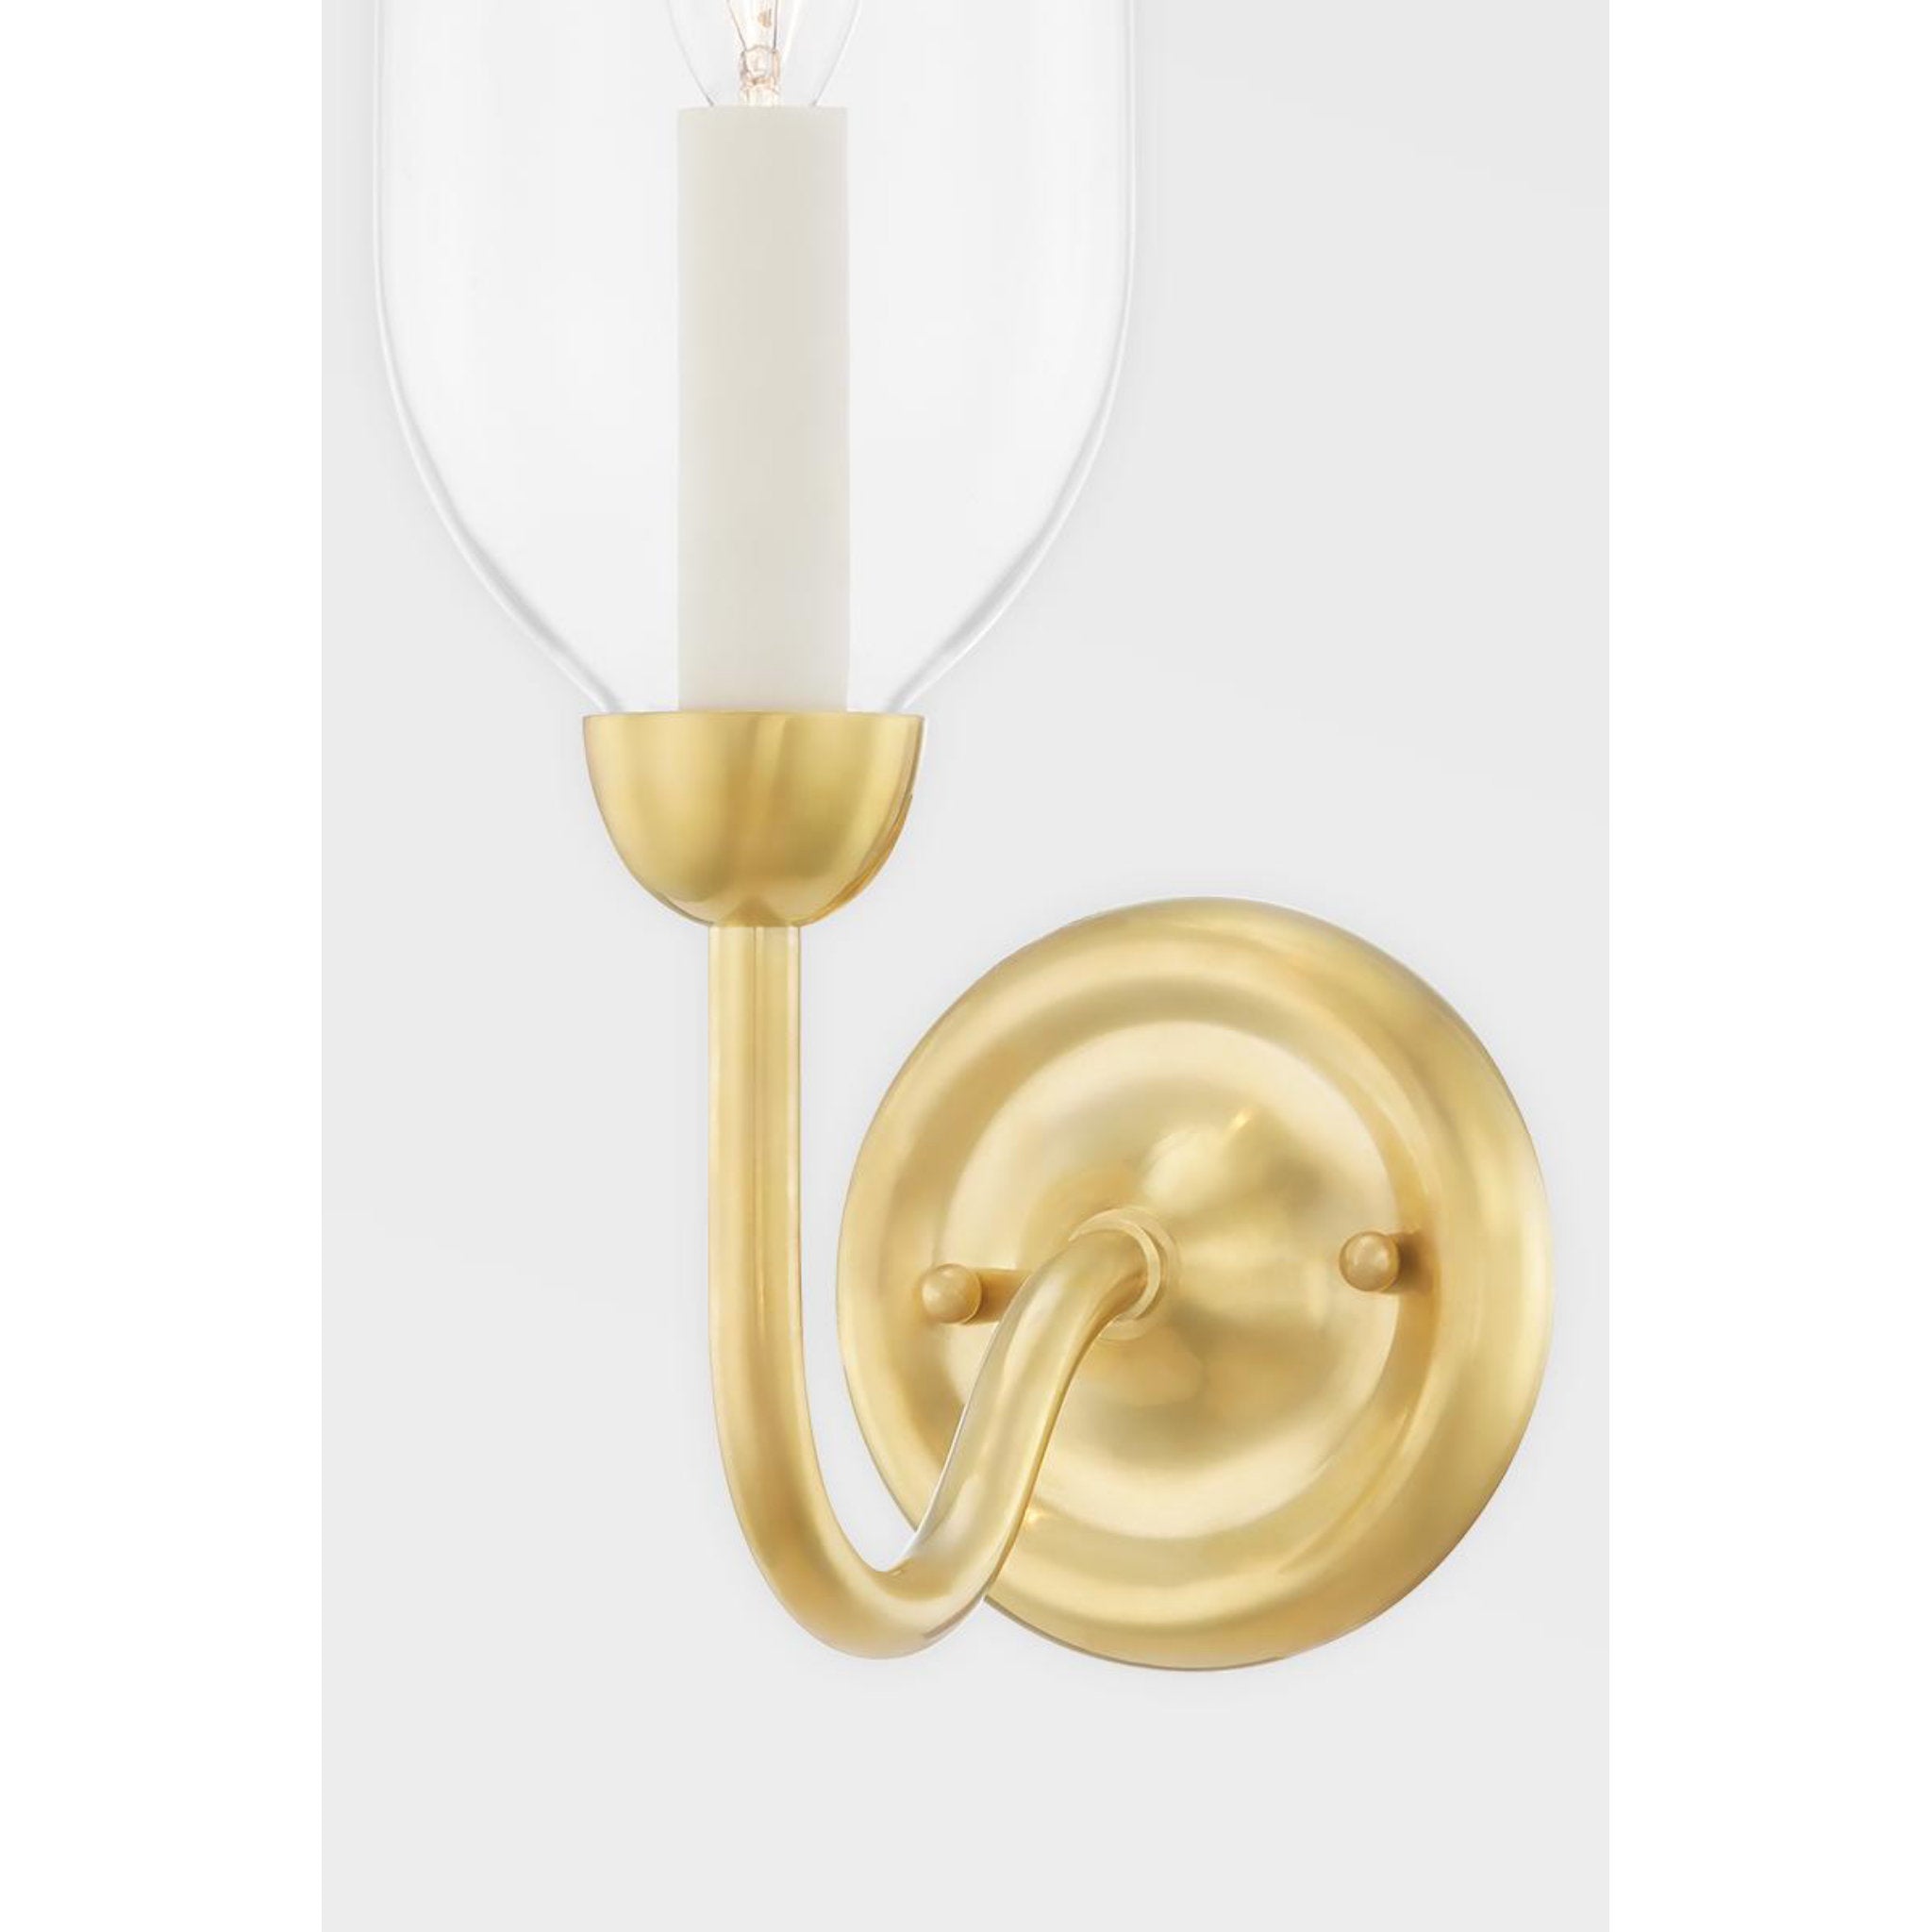 Classic No.1 1 Light Plug-in Sconce in Aged Brass by Mark D. Sikes